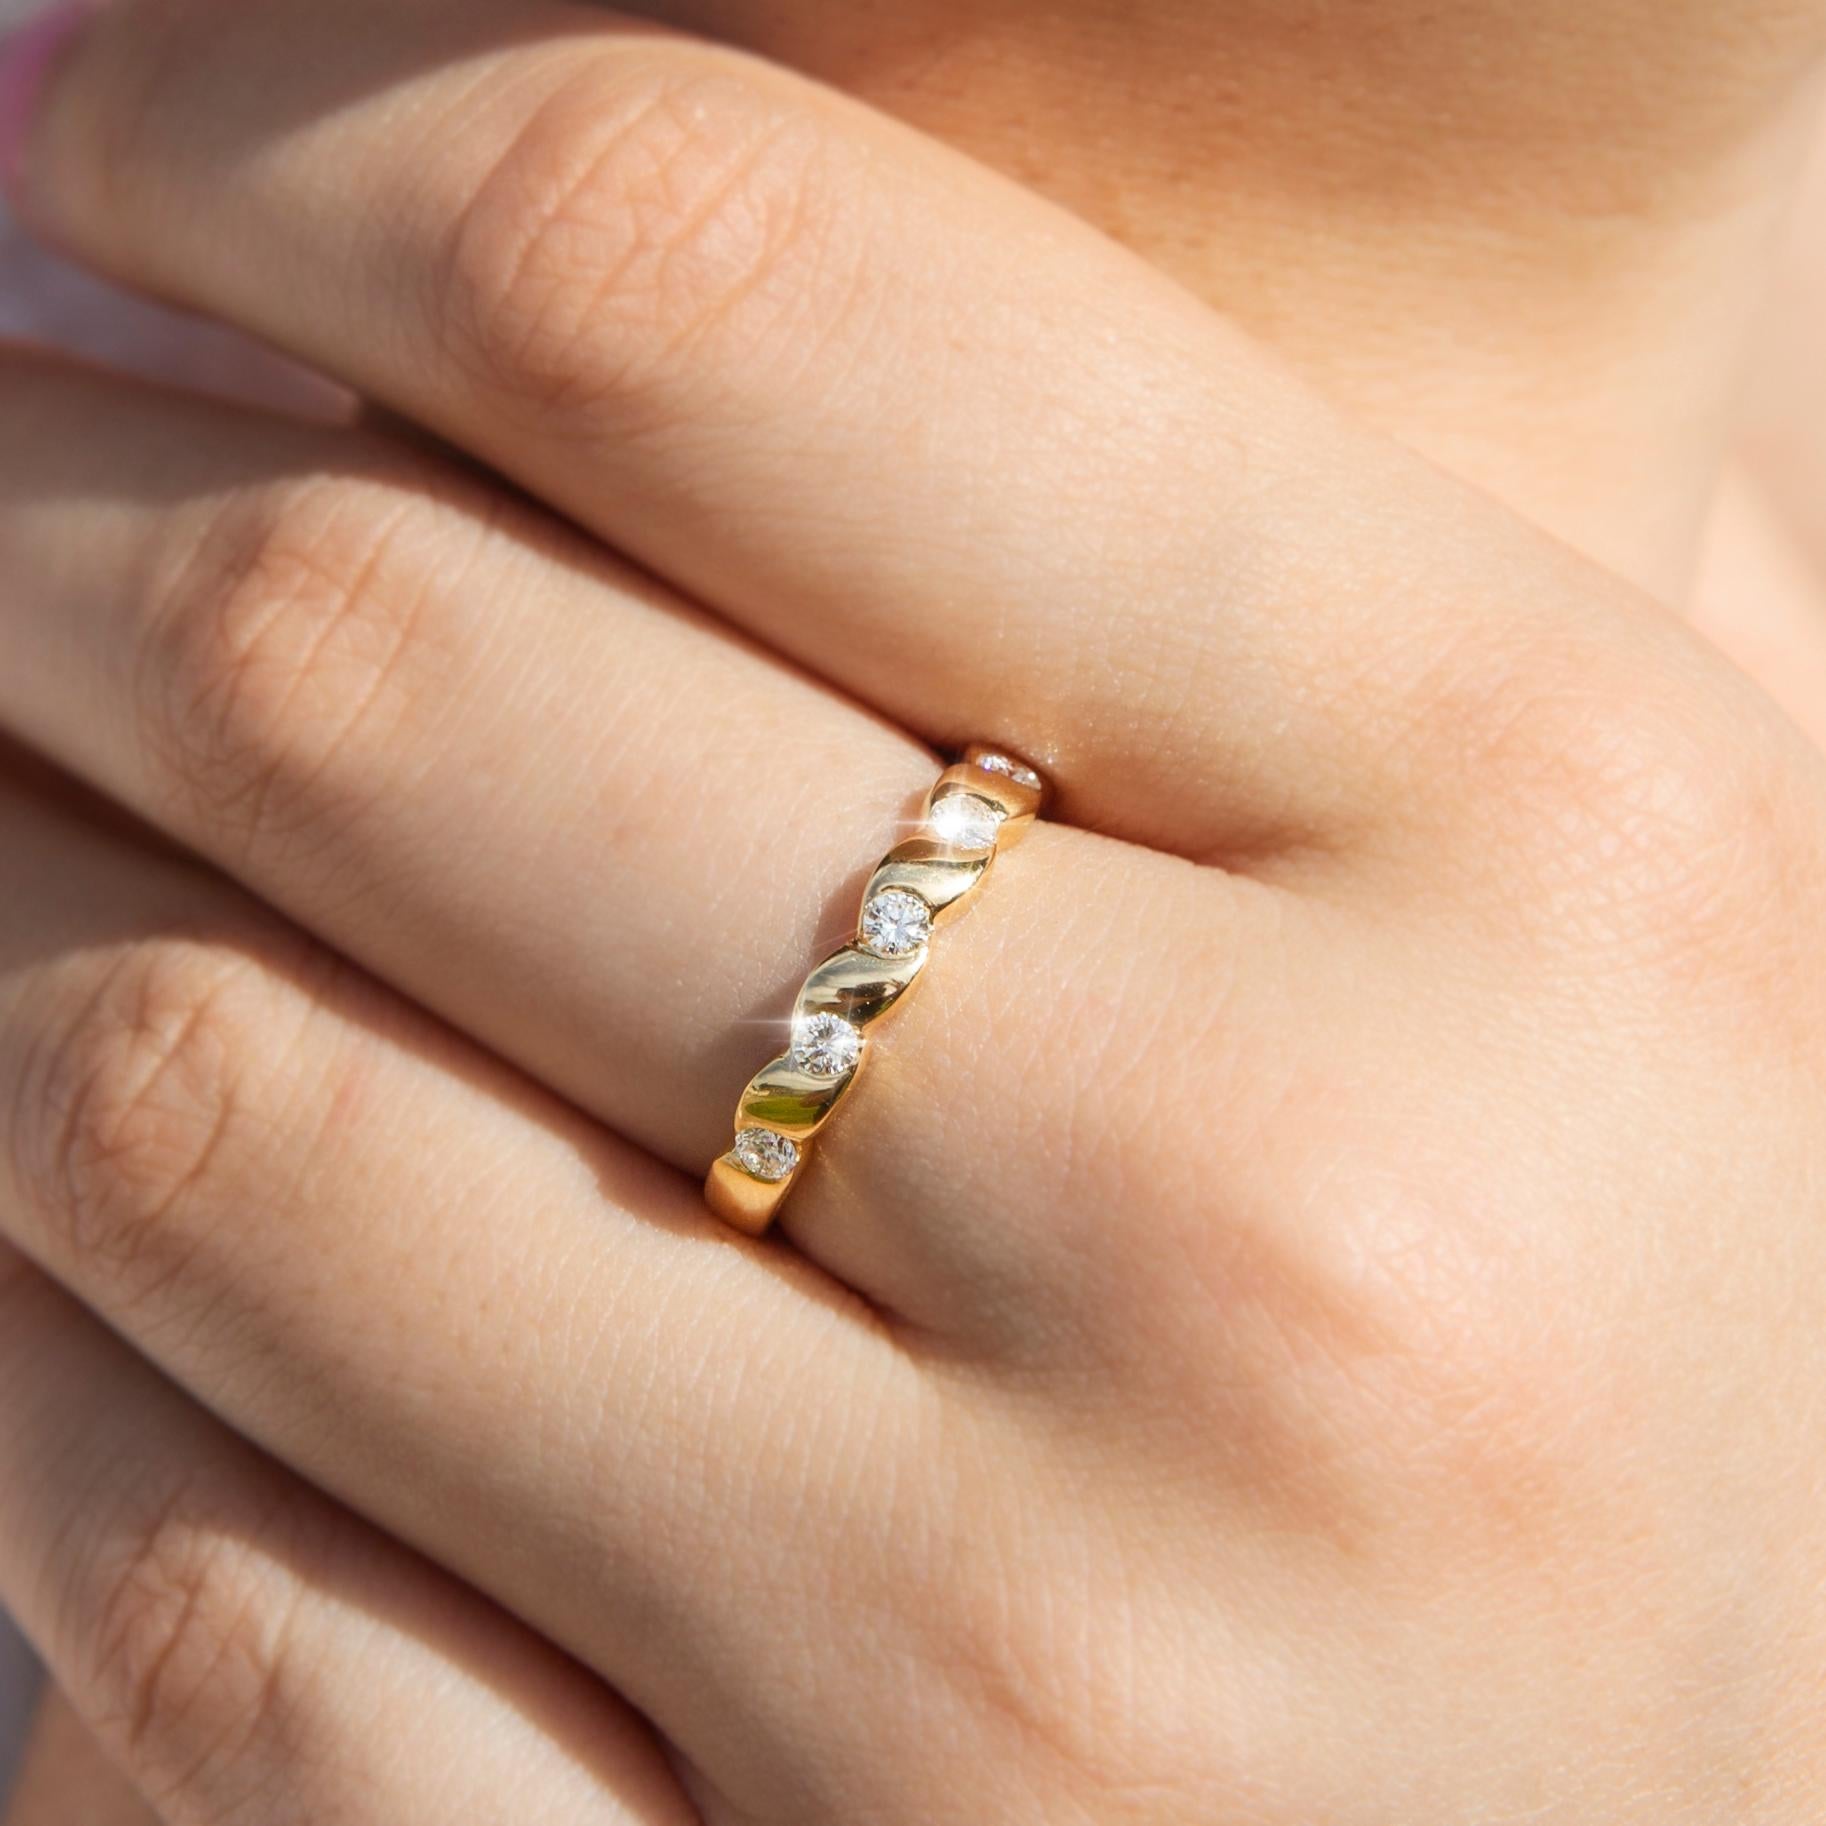 Forged in 18 carat yellow gold, this lovely diamond band ring is a delightful balance of simplicity and elegance. The front of the yellow gold band holds a shimmering row of seven round brilliant cut diamonds set between wave-like bar settings. We